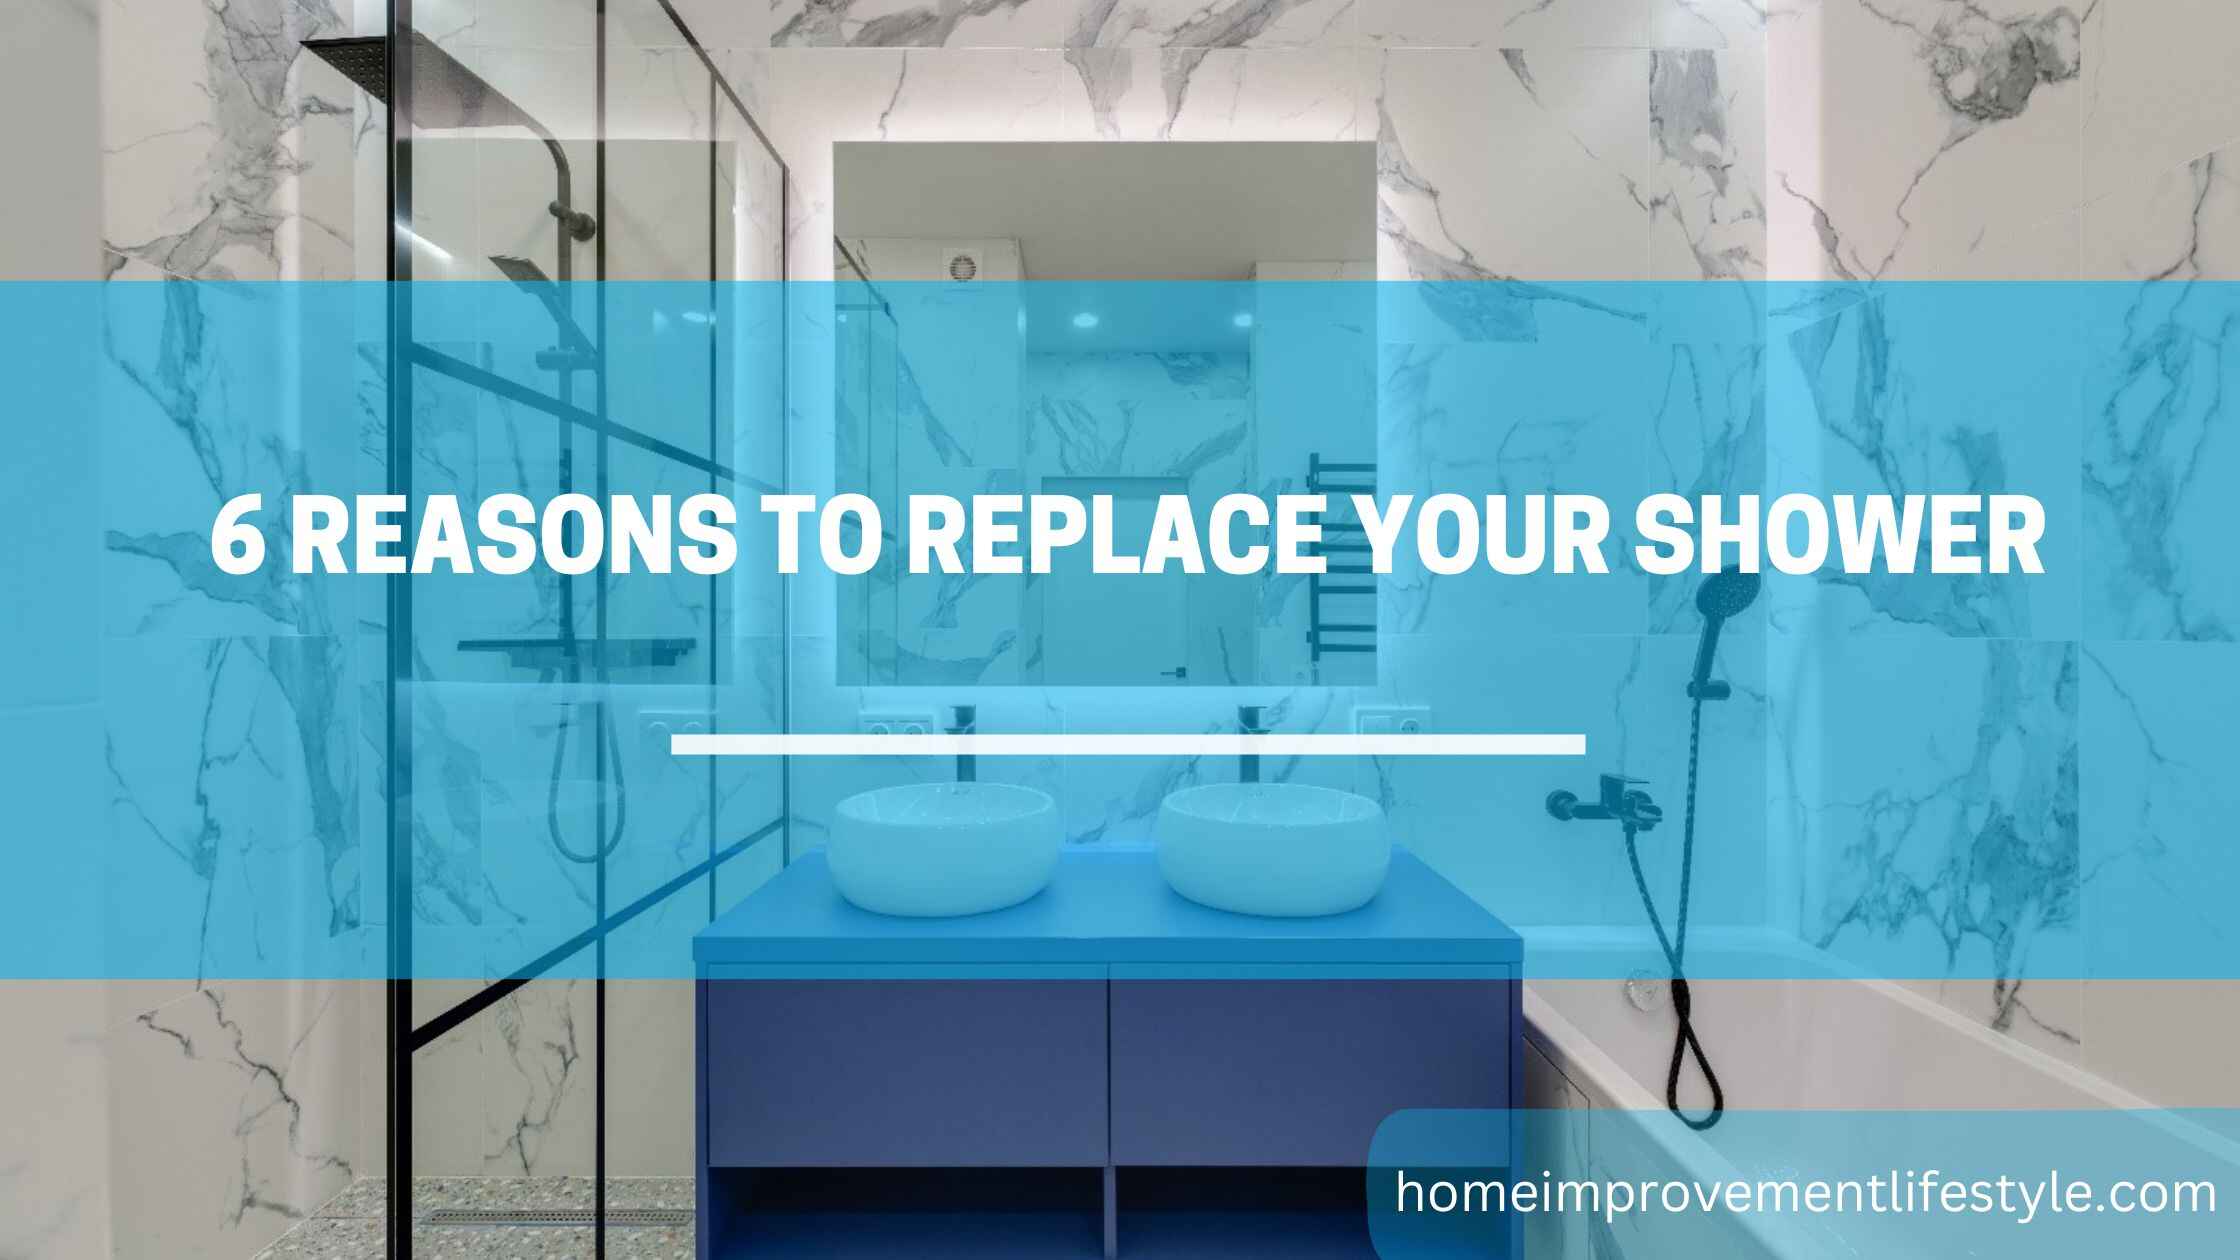 6 Reasons To Replace Your Shower